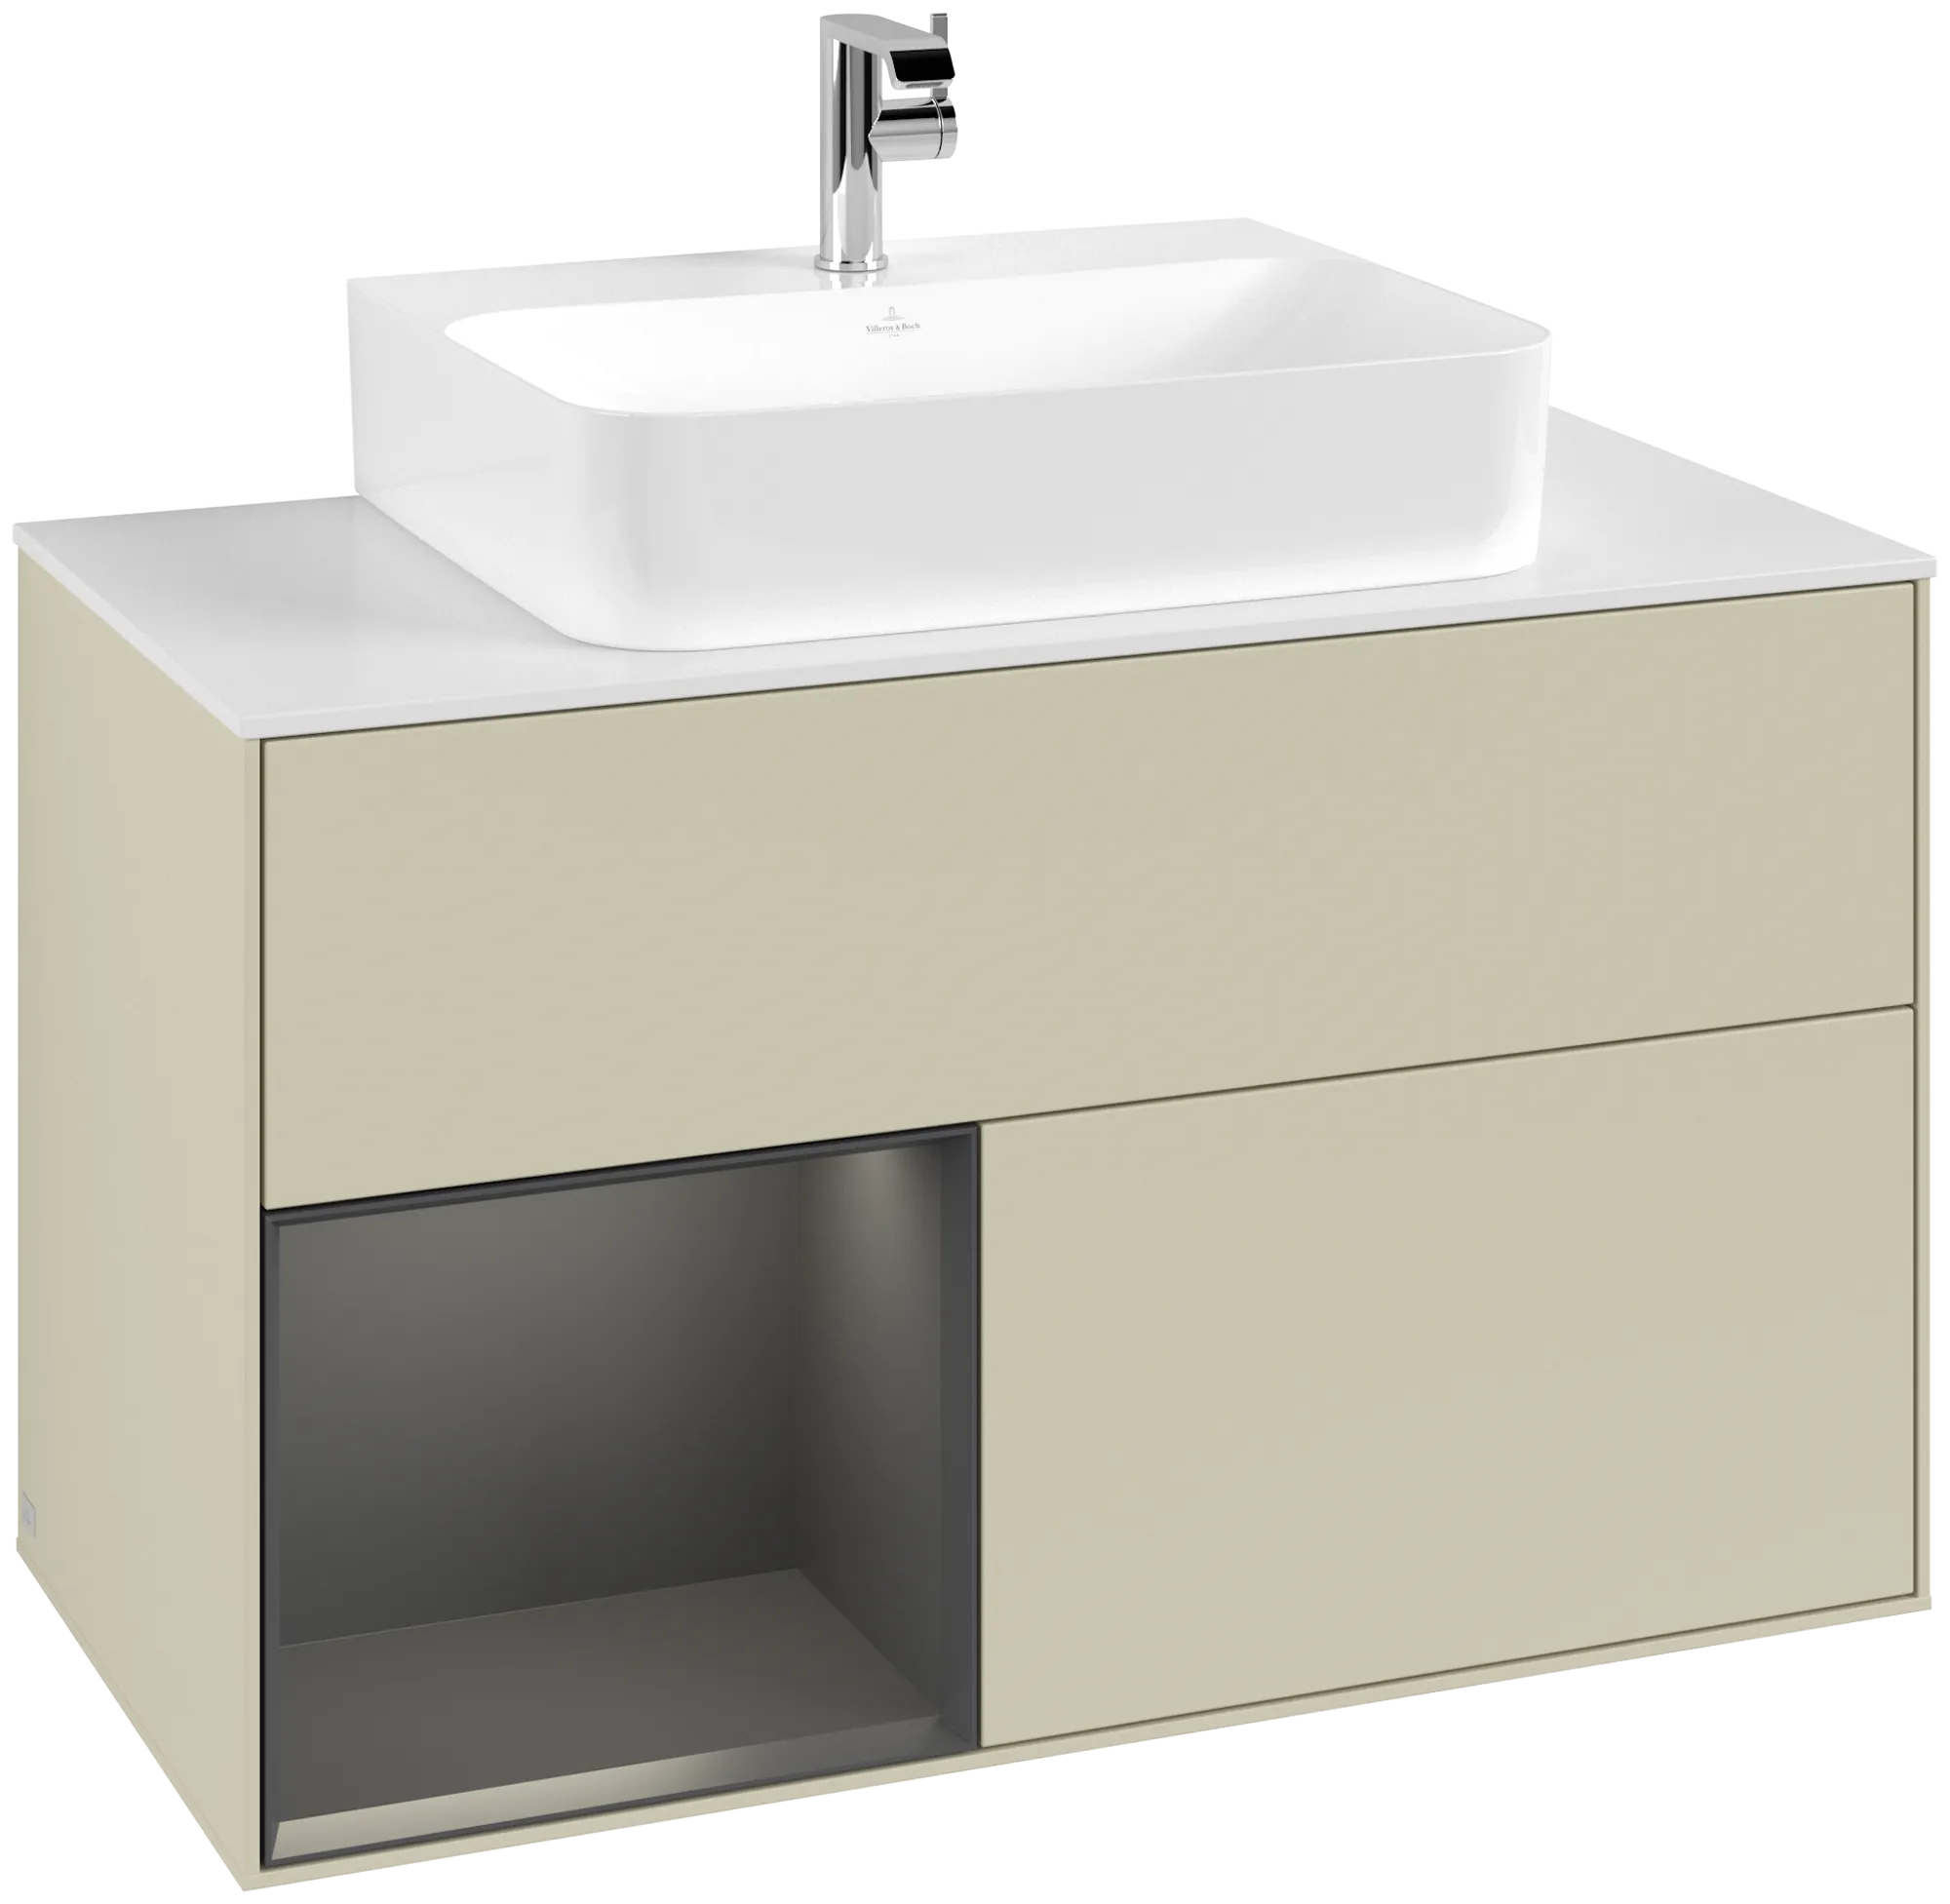 Picture of VILLEROY BOCH Finion Vanity unit, with lighting, 2 pull-out compartments, 1000 x 603 x 501 mm, Silk Grey Matt Lacquer / Anthracite Matt Lacquer / Glass White Matt #G111GKHJ